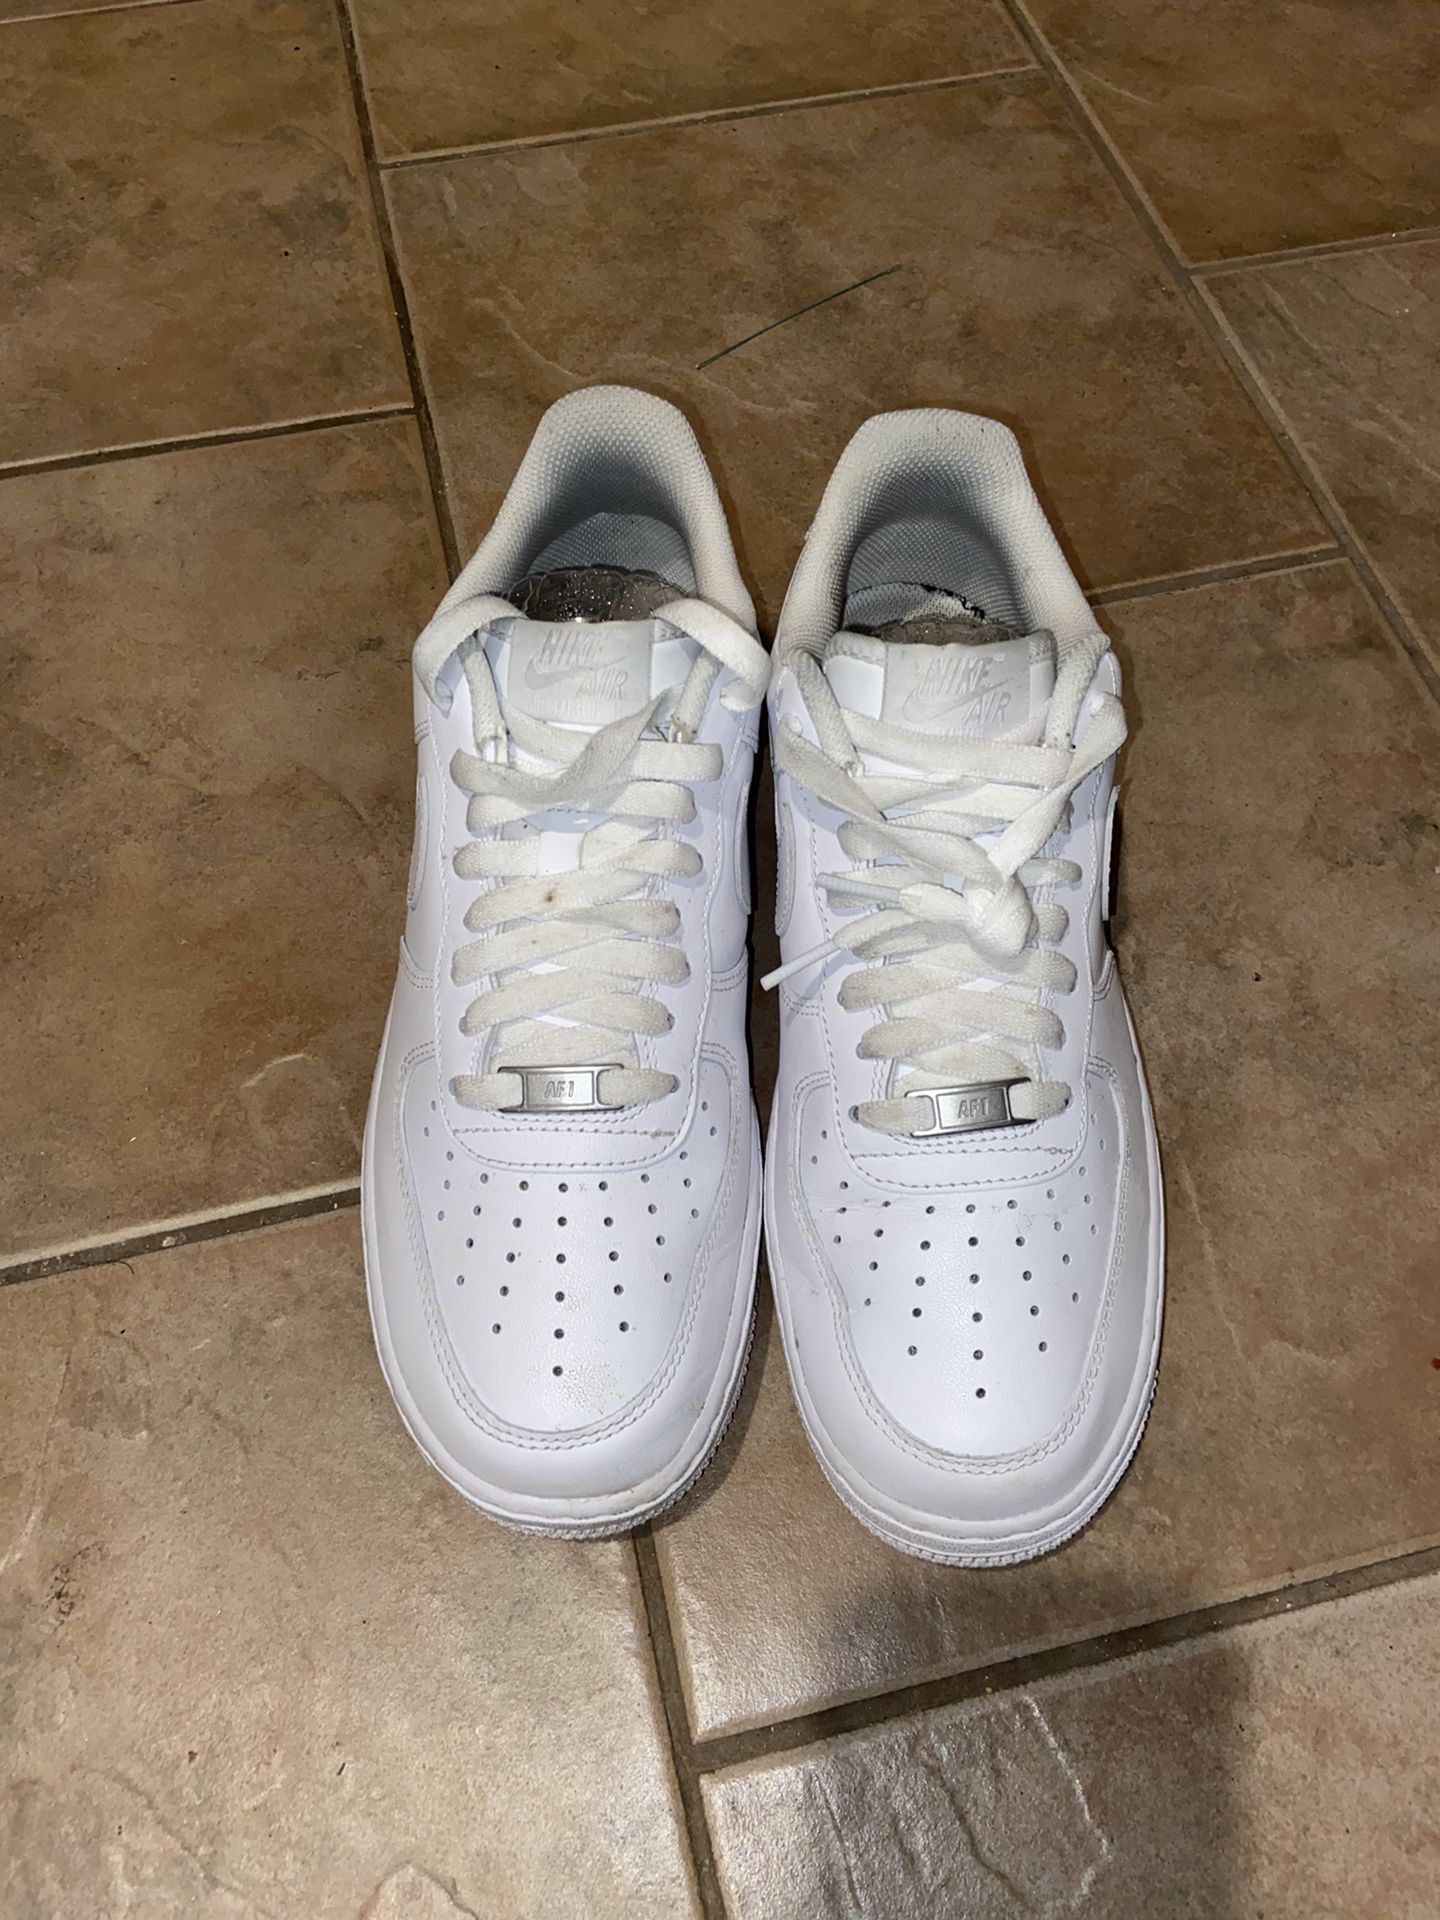 Air Force 1s size 8.5